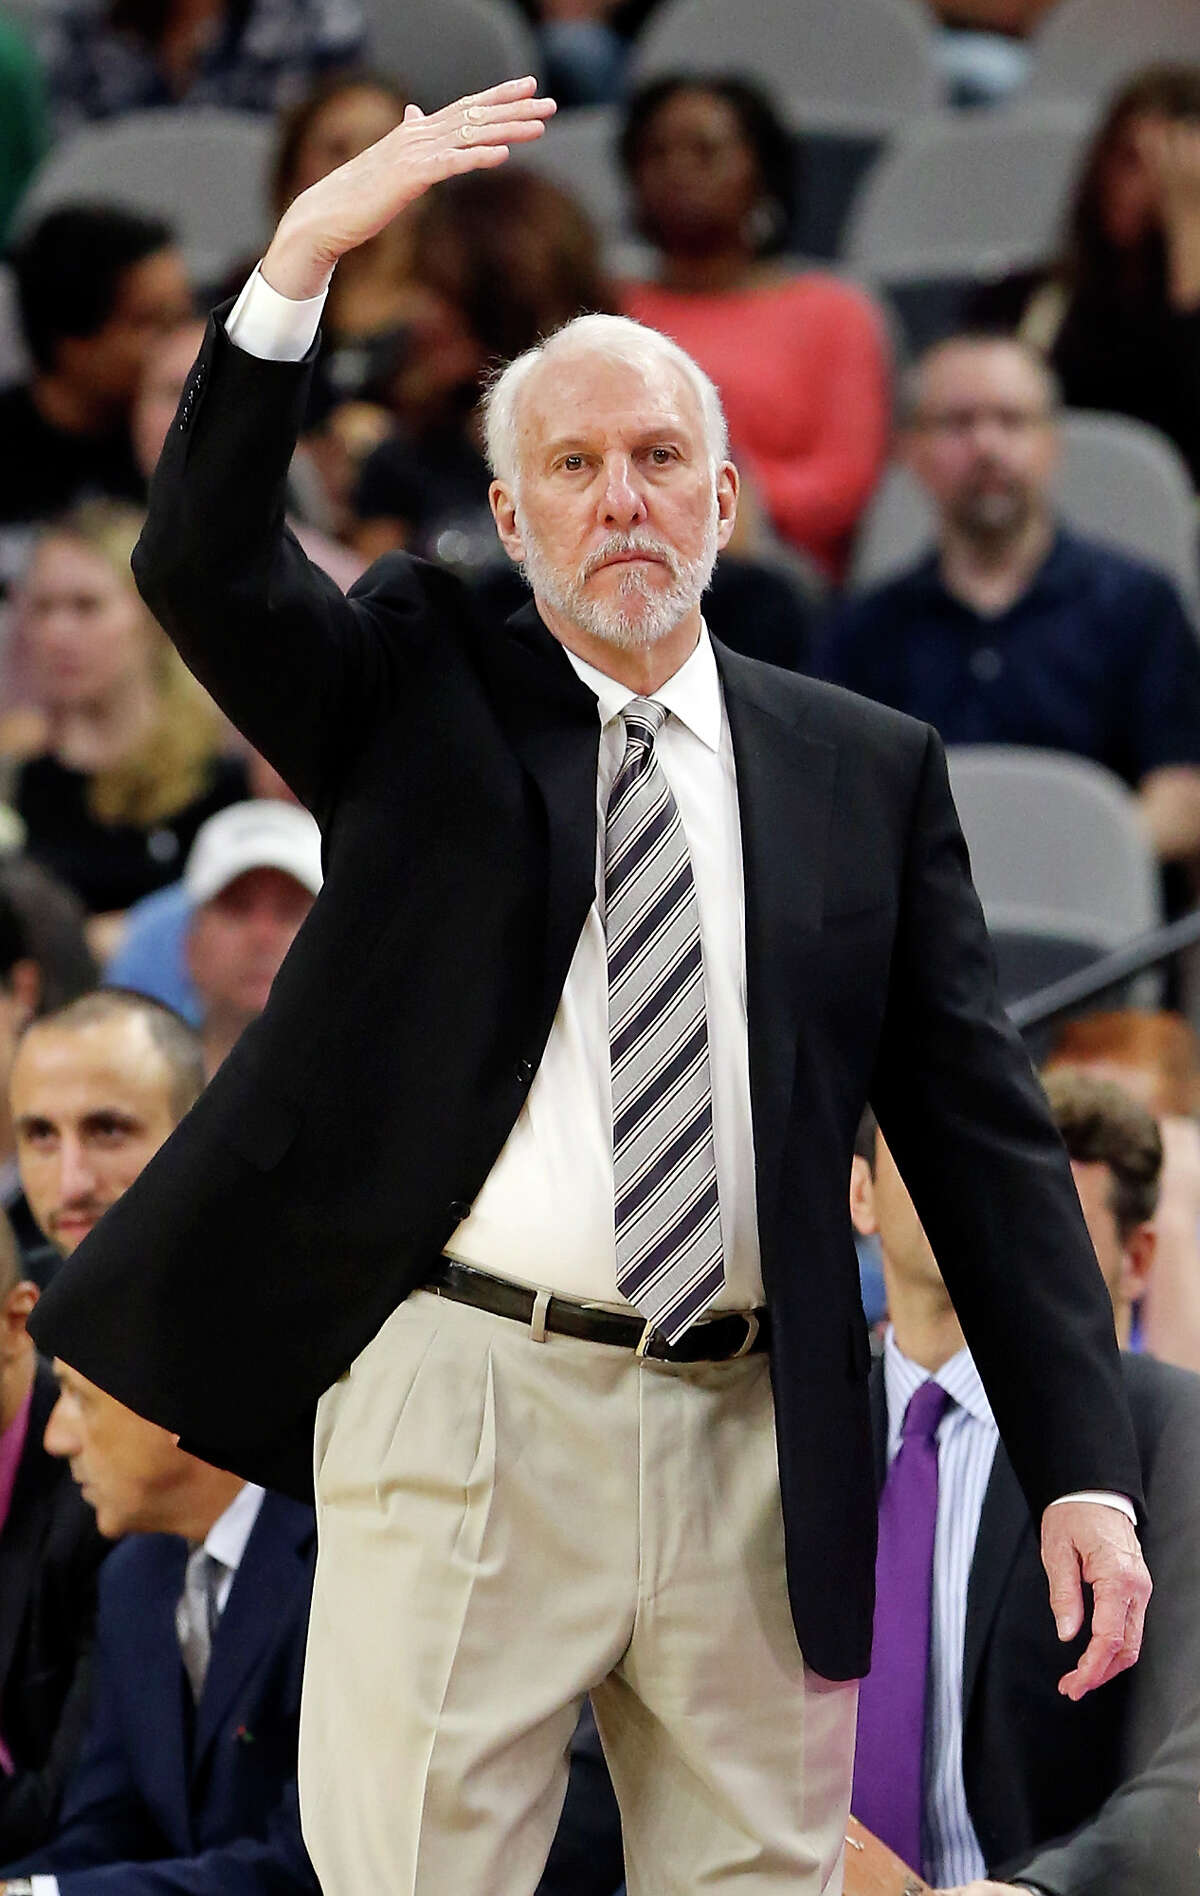 San Antonio Spurs head coach Gregg Popovich calls a play during second half action against the Houston Rockets Friday Oct. 23, 2015 at the AT&T Center. The Spurs won 111-86.